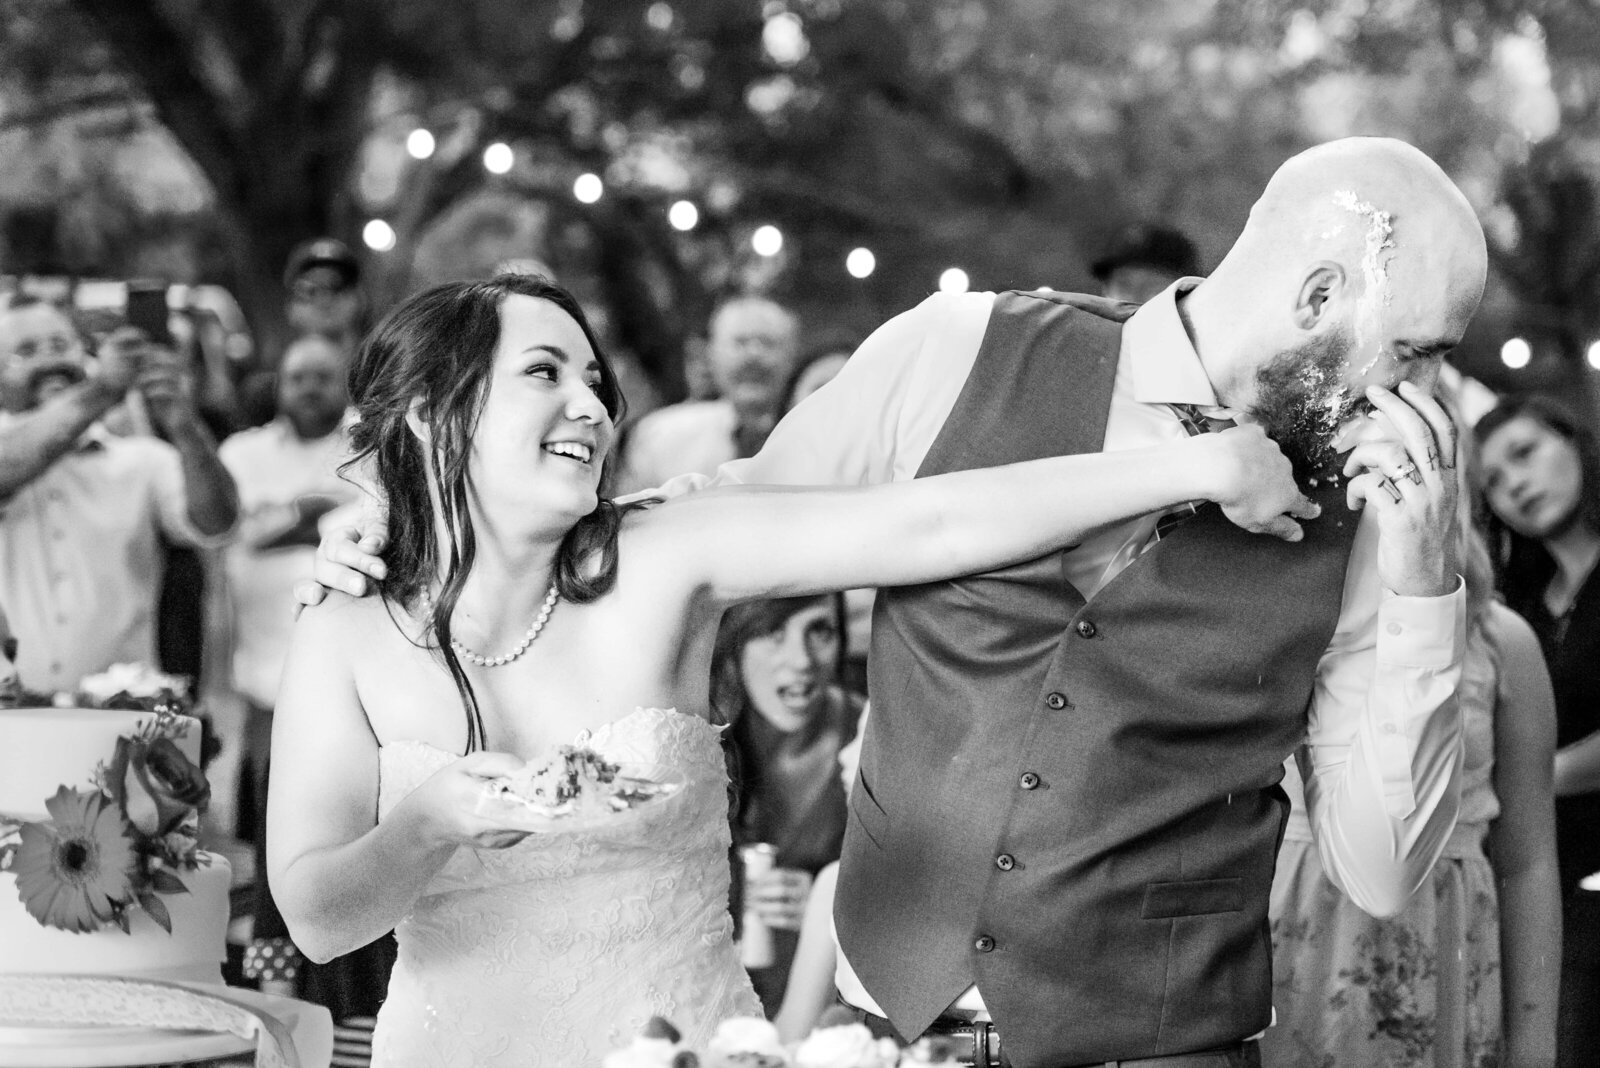 Bride smashing cake into the groom's face with passion.